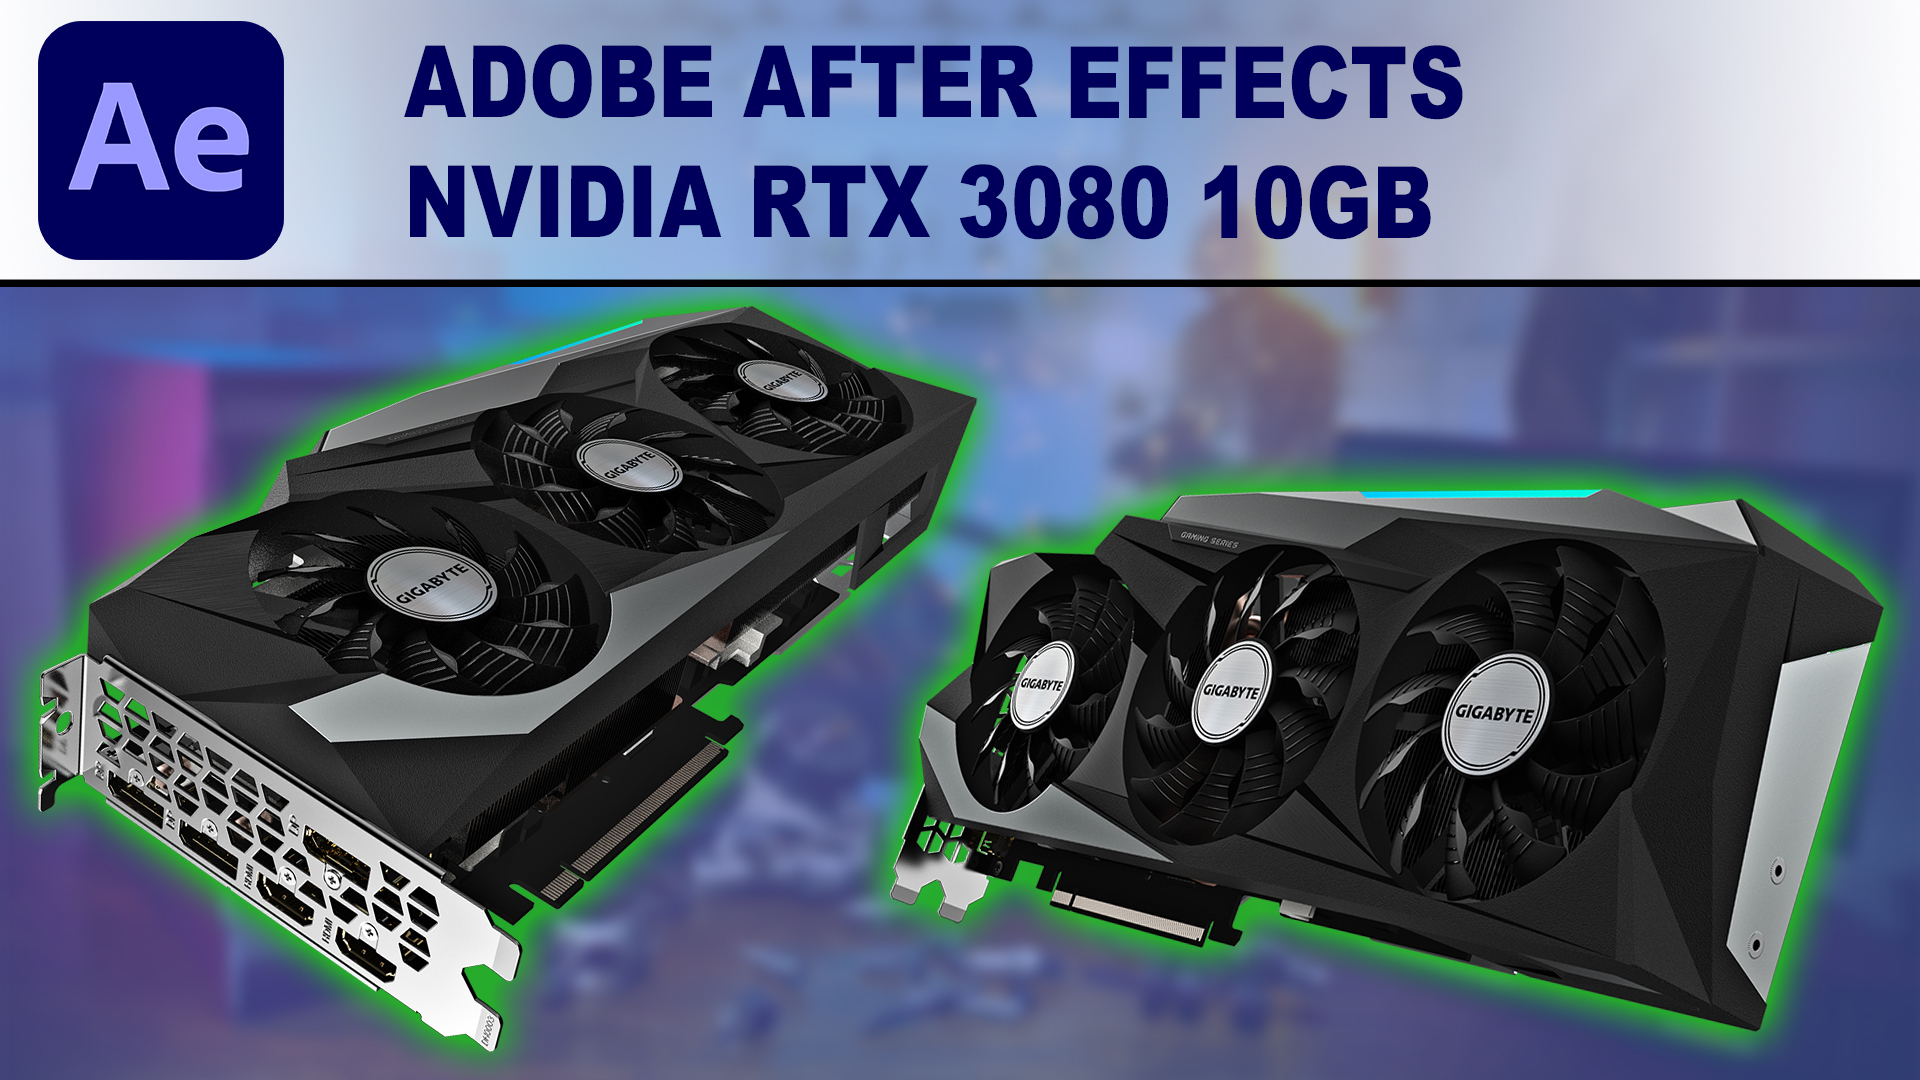 Adobe After Effects - NVIDIA GeForce RTX Performance | Puget Systems